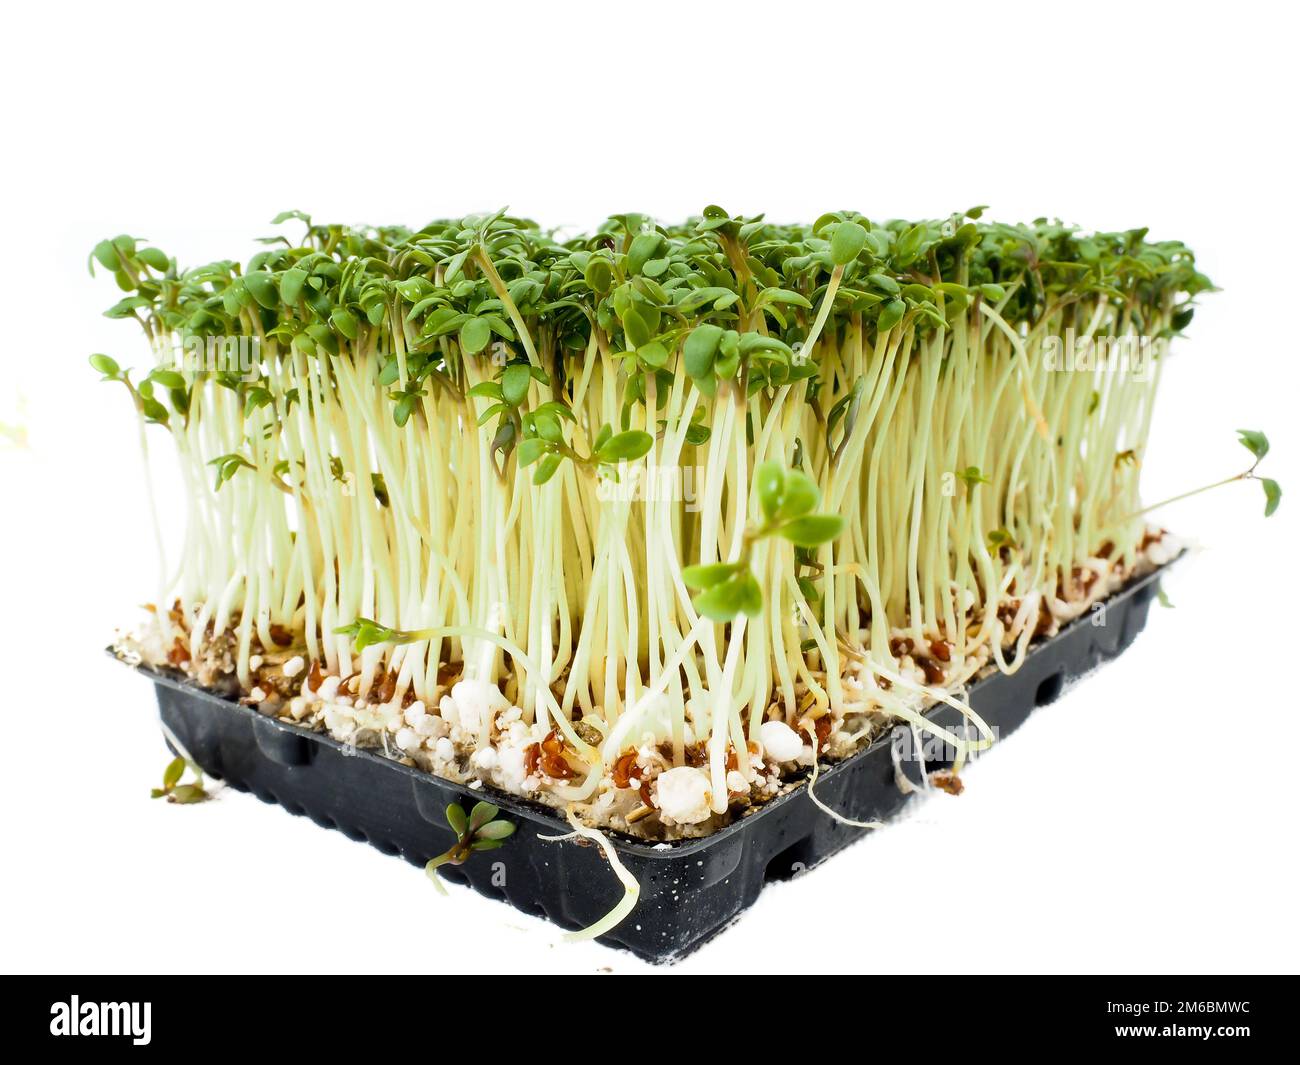 Watercress plants growing in a little black tray, towards white Stock Photo